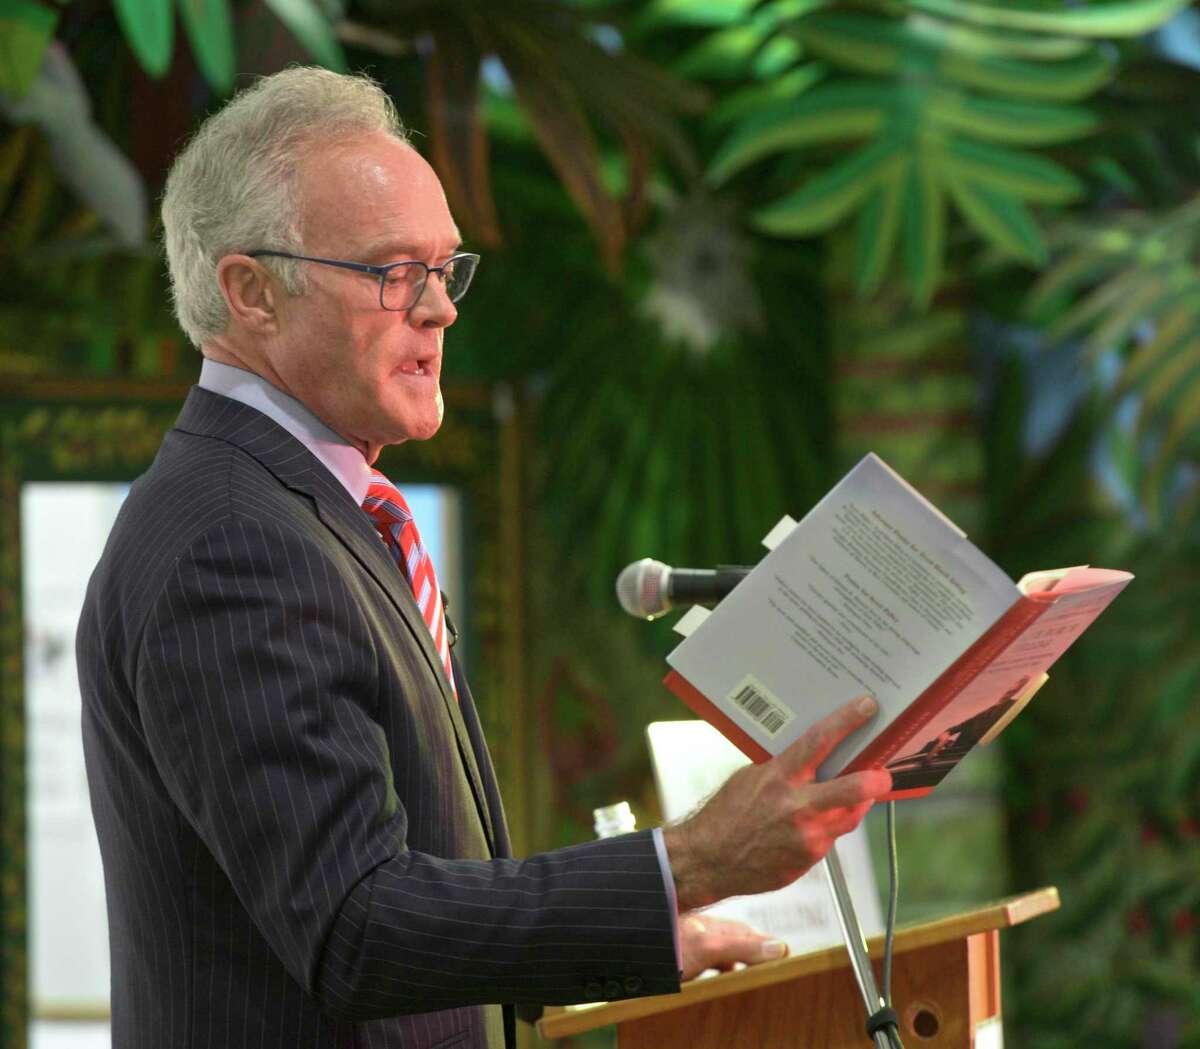 60-Minutes correspondent Scott Pelley reads from his new book, "Truth Worth Telling," to a sold-out crowd at the Wilton Library , Thursday night, October 17.